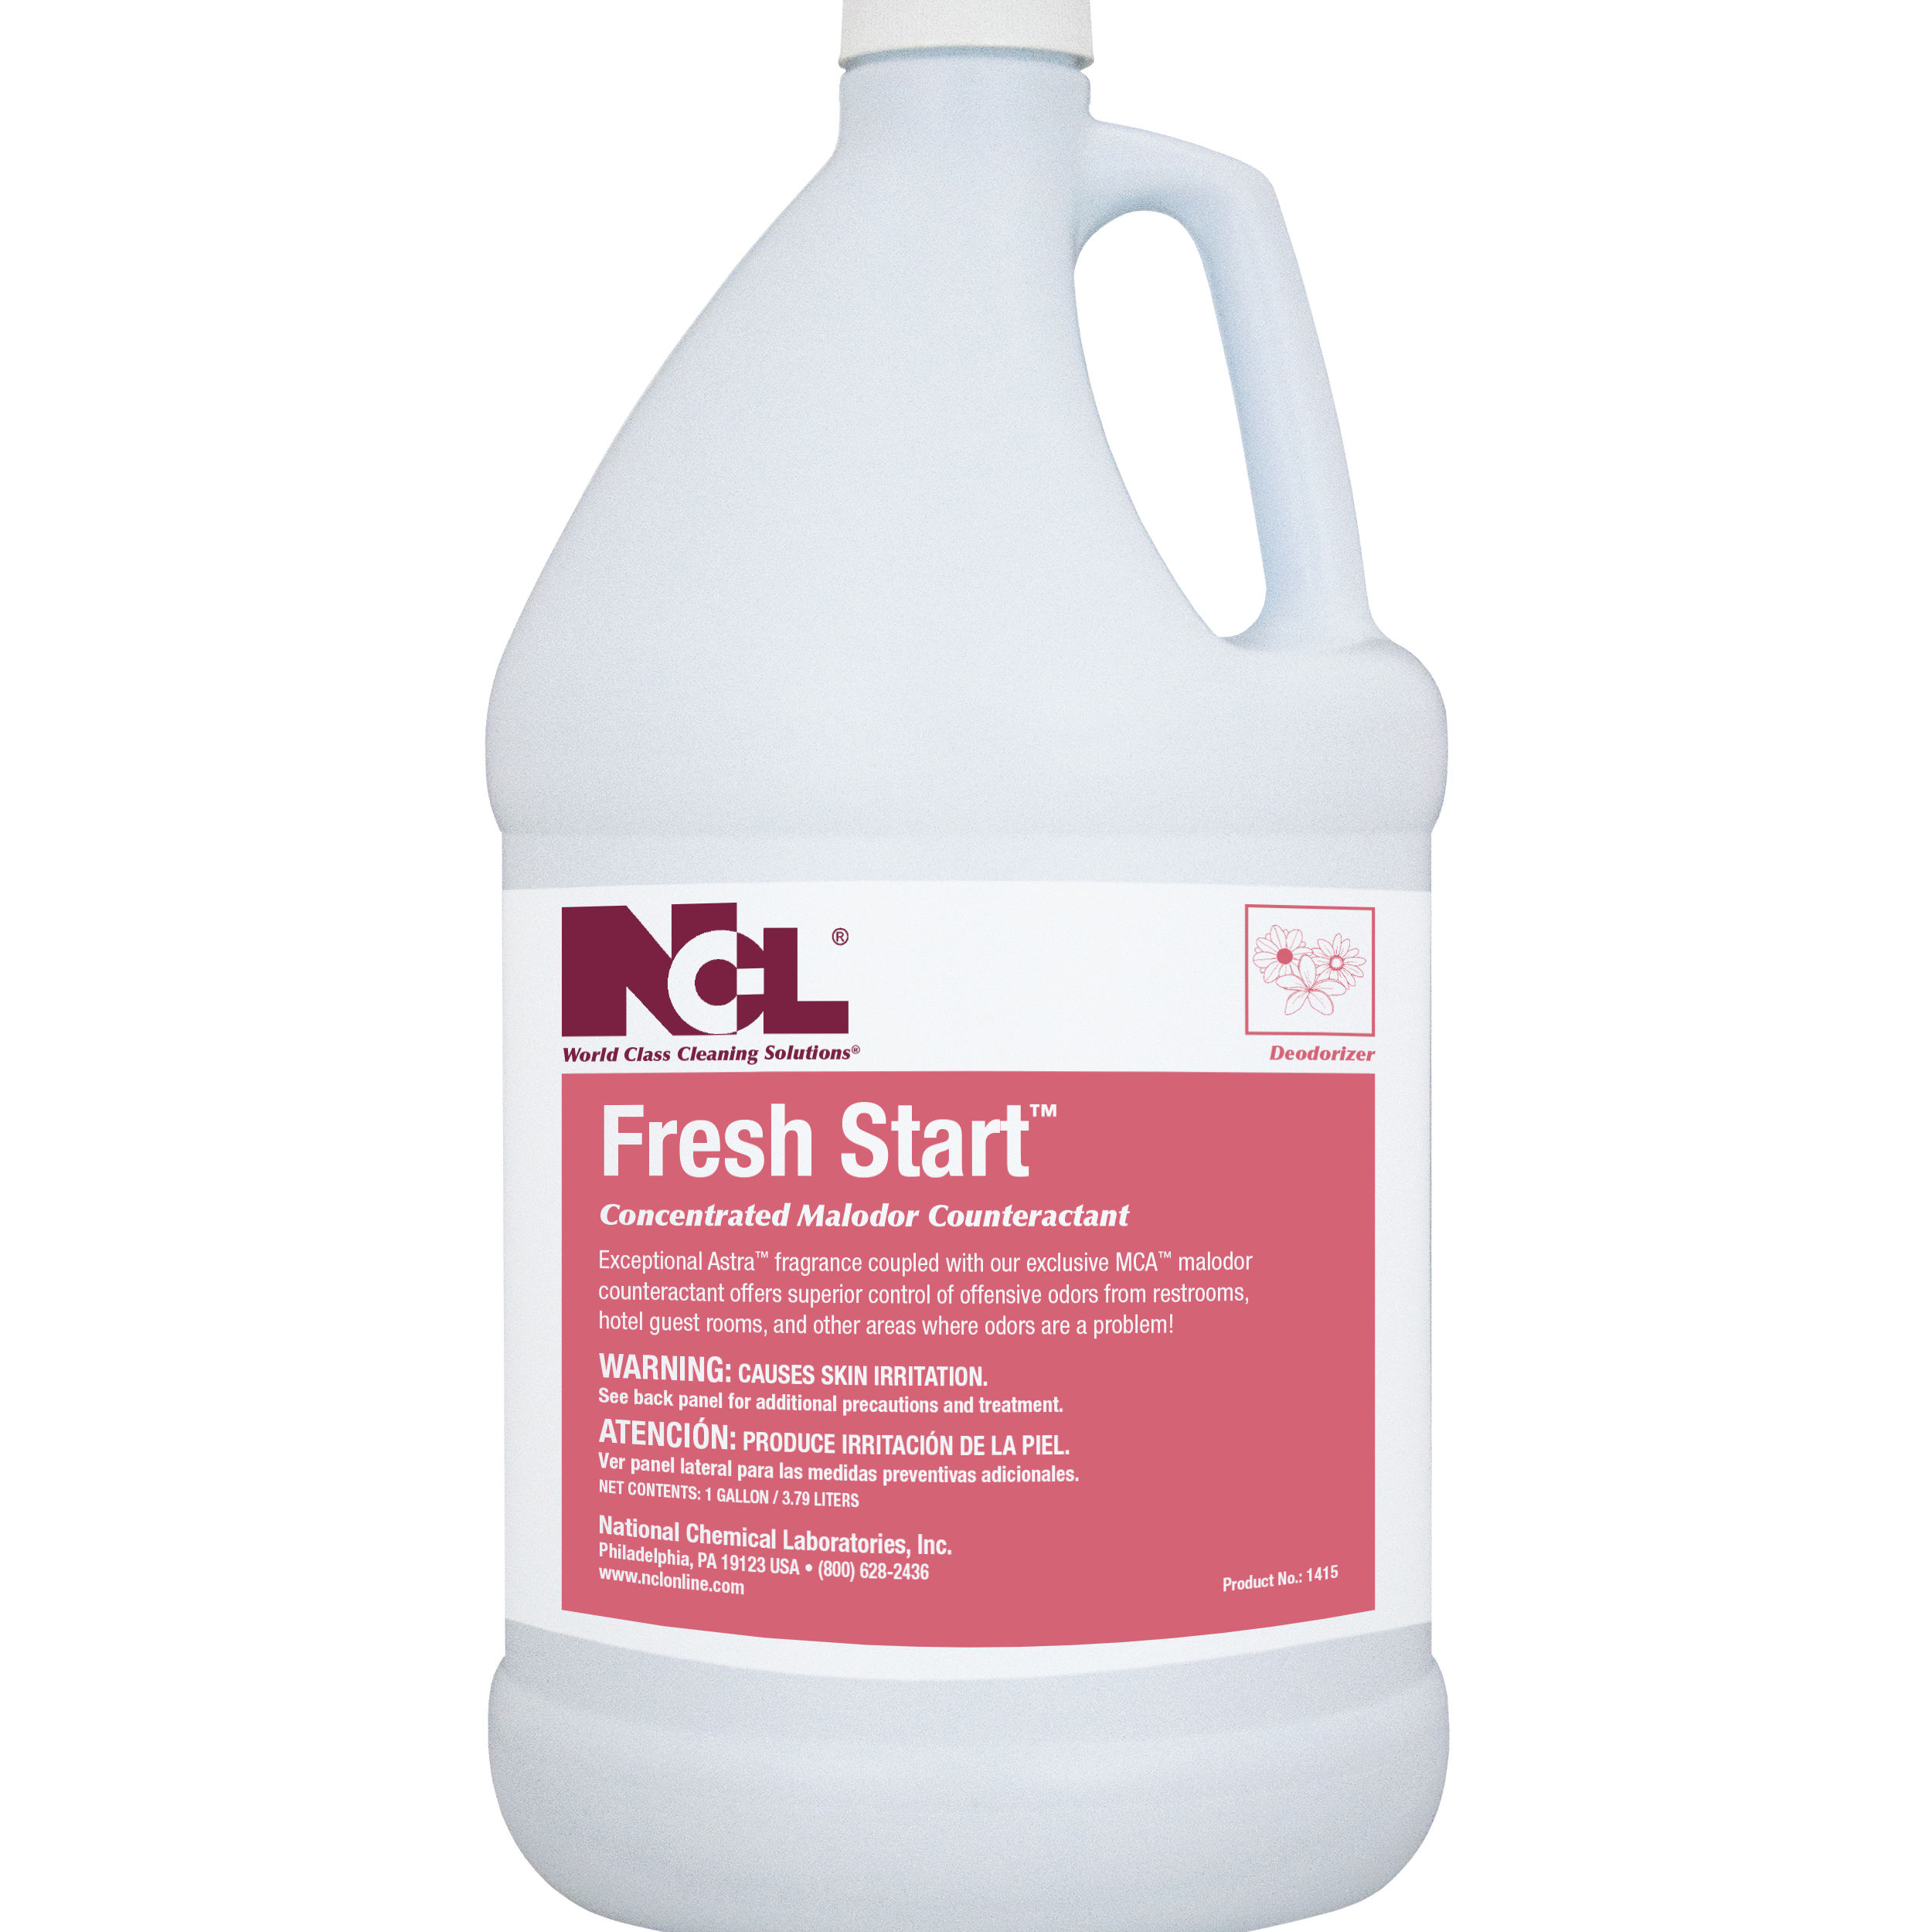  FRESH START Concentrated Malodor Counteractant 4/1 Gal. Case (NCL1415-29) 